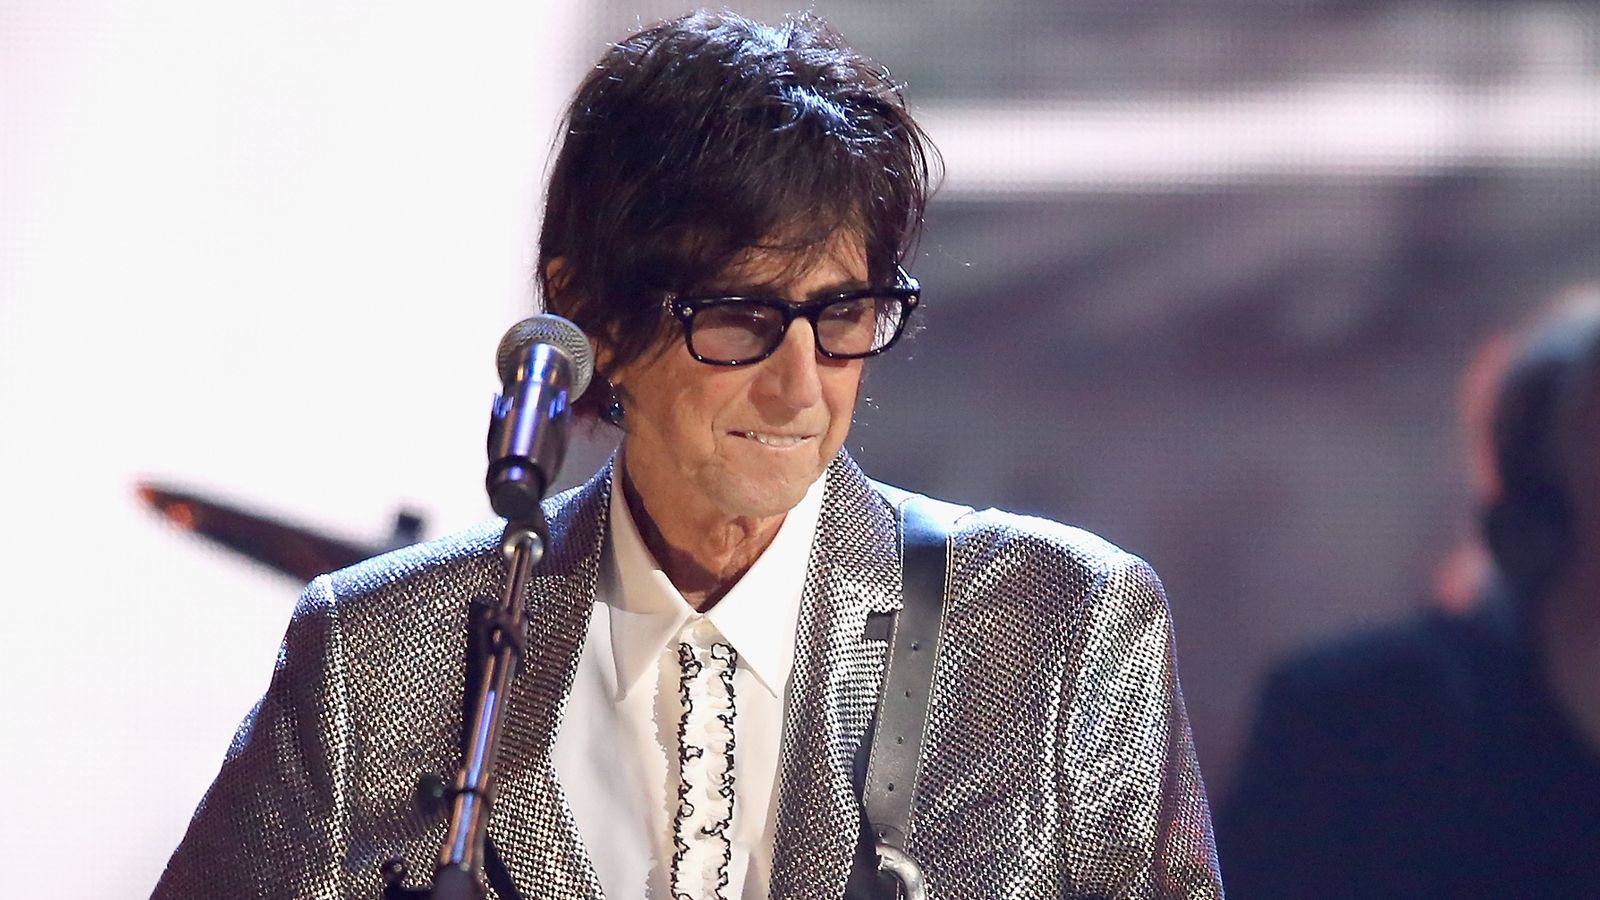 The Cars Frontman Ric Ocasek Dies Aged 75 Ents And Arts News Sky News